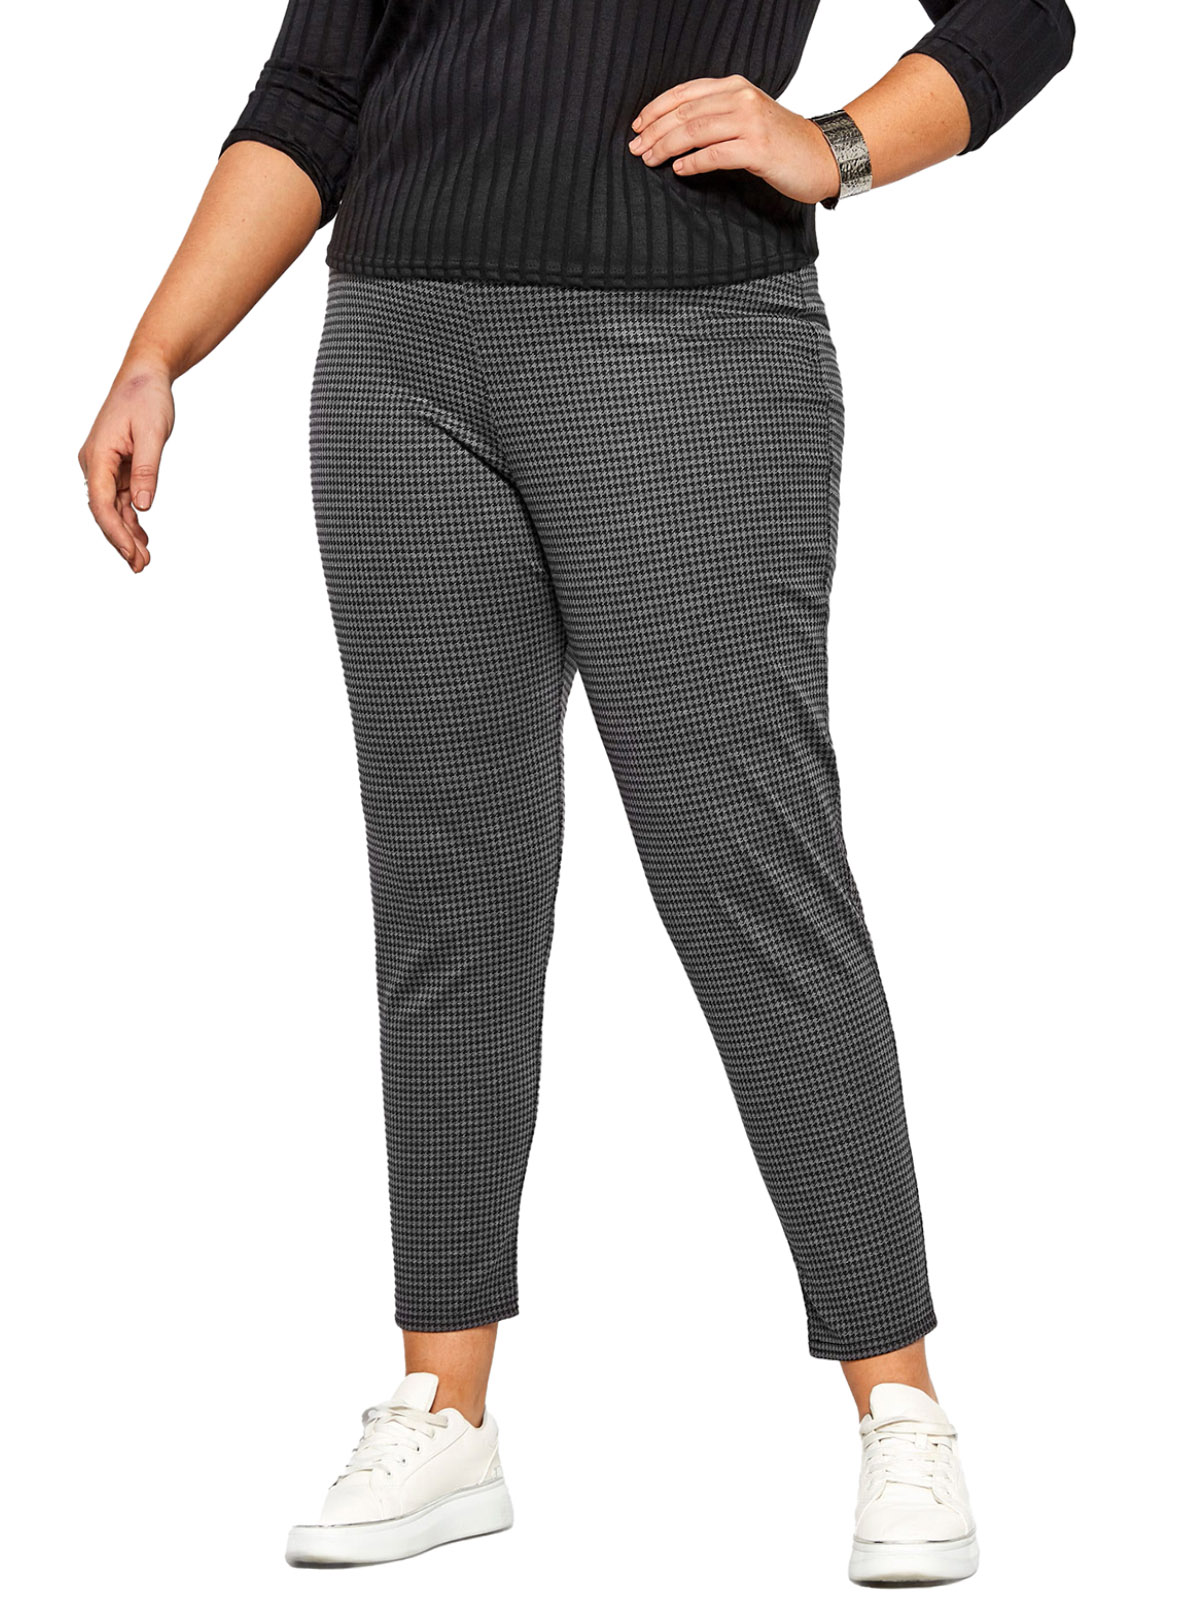 CURVE - - Curve GREY Dogtooth Ponte Trousers - Plus Size 22 to 34/36